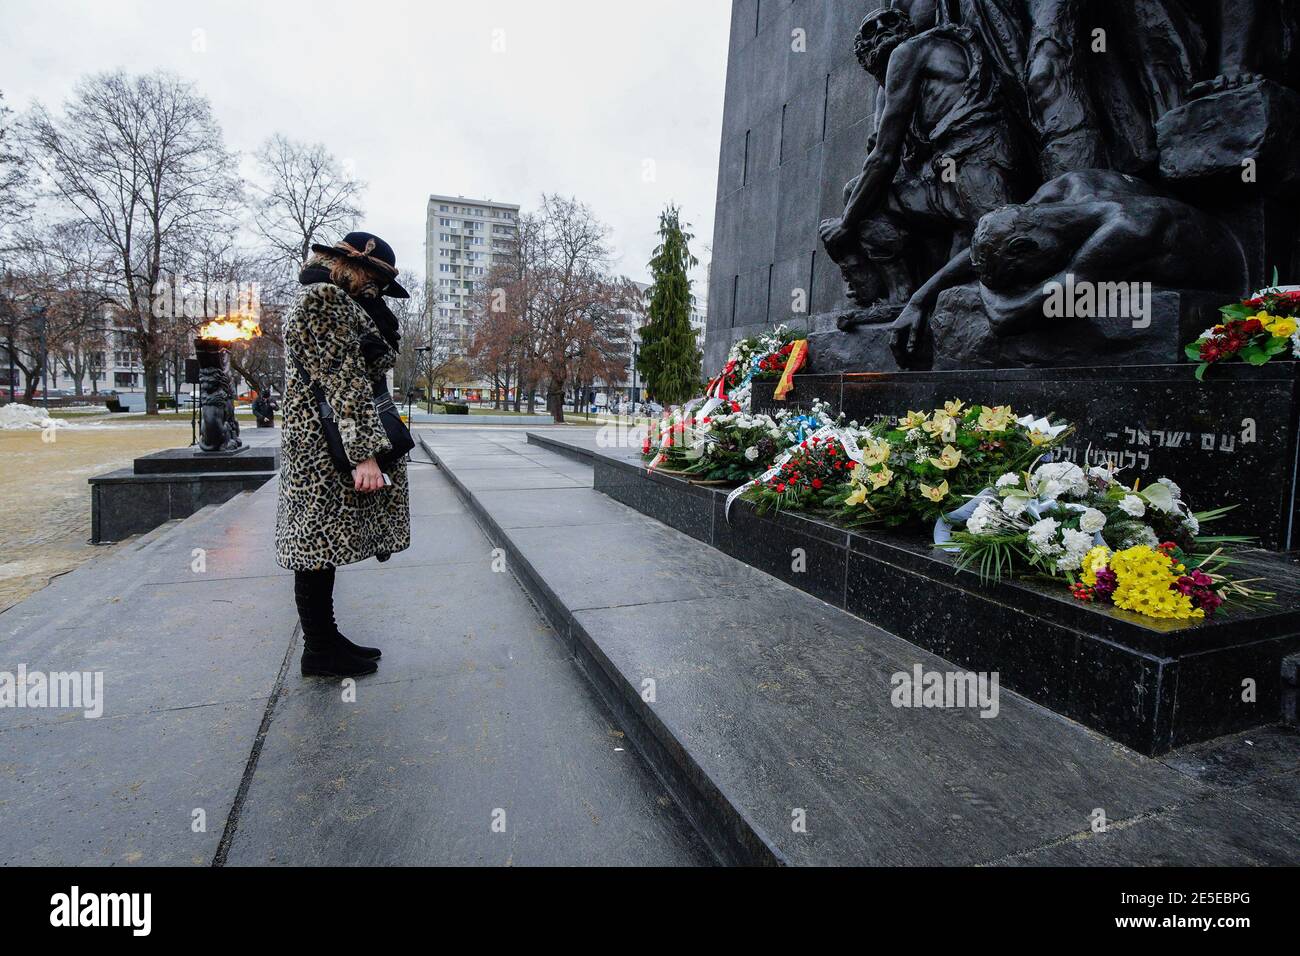 Warsaw, Poland. 27th Jan, 2021. A woman pays her respects to the victims of the Holocaust at the Ghetto Heroes Monument in Warsaw, Poland, on Jan. 27, 2021. Amid the ongoing COVID-19 pandemic, Poland commemorated the International Holocaust Remembrance Day on Wednesday almost fully online, with limited live events including honor guards and wreath-laying at various monuments throughout the country. Credit: Jaap Arriens/Xinhua/Alamy Live News Stock Photo